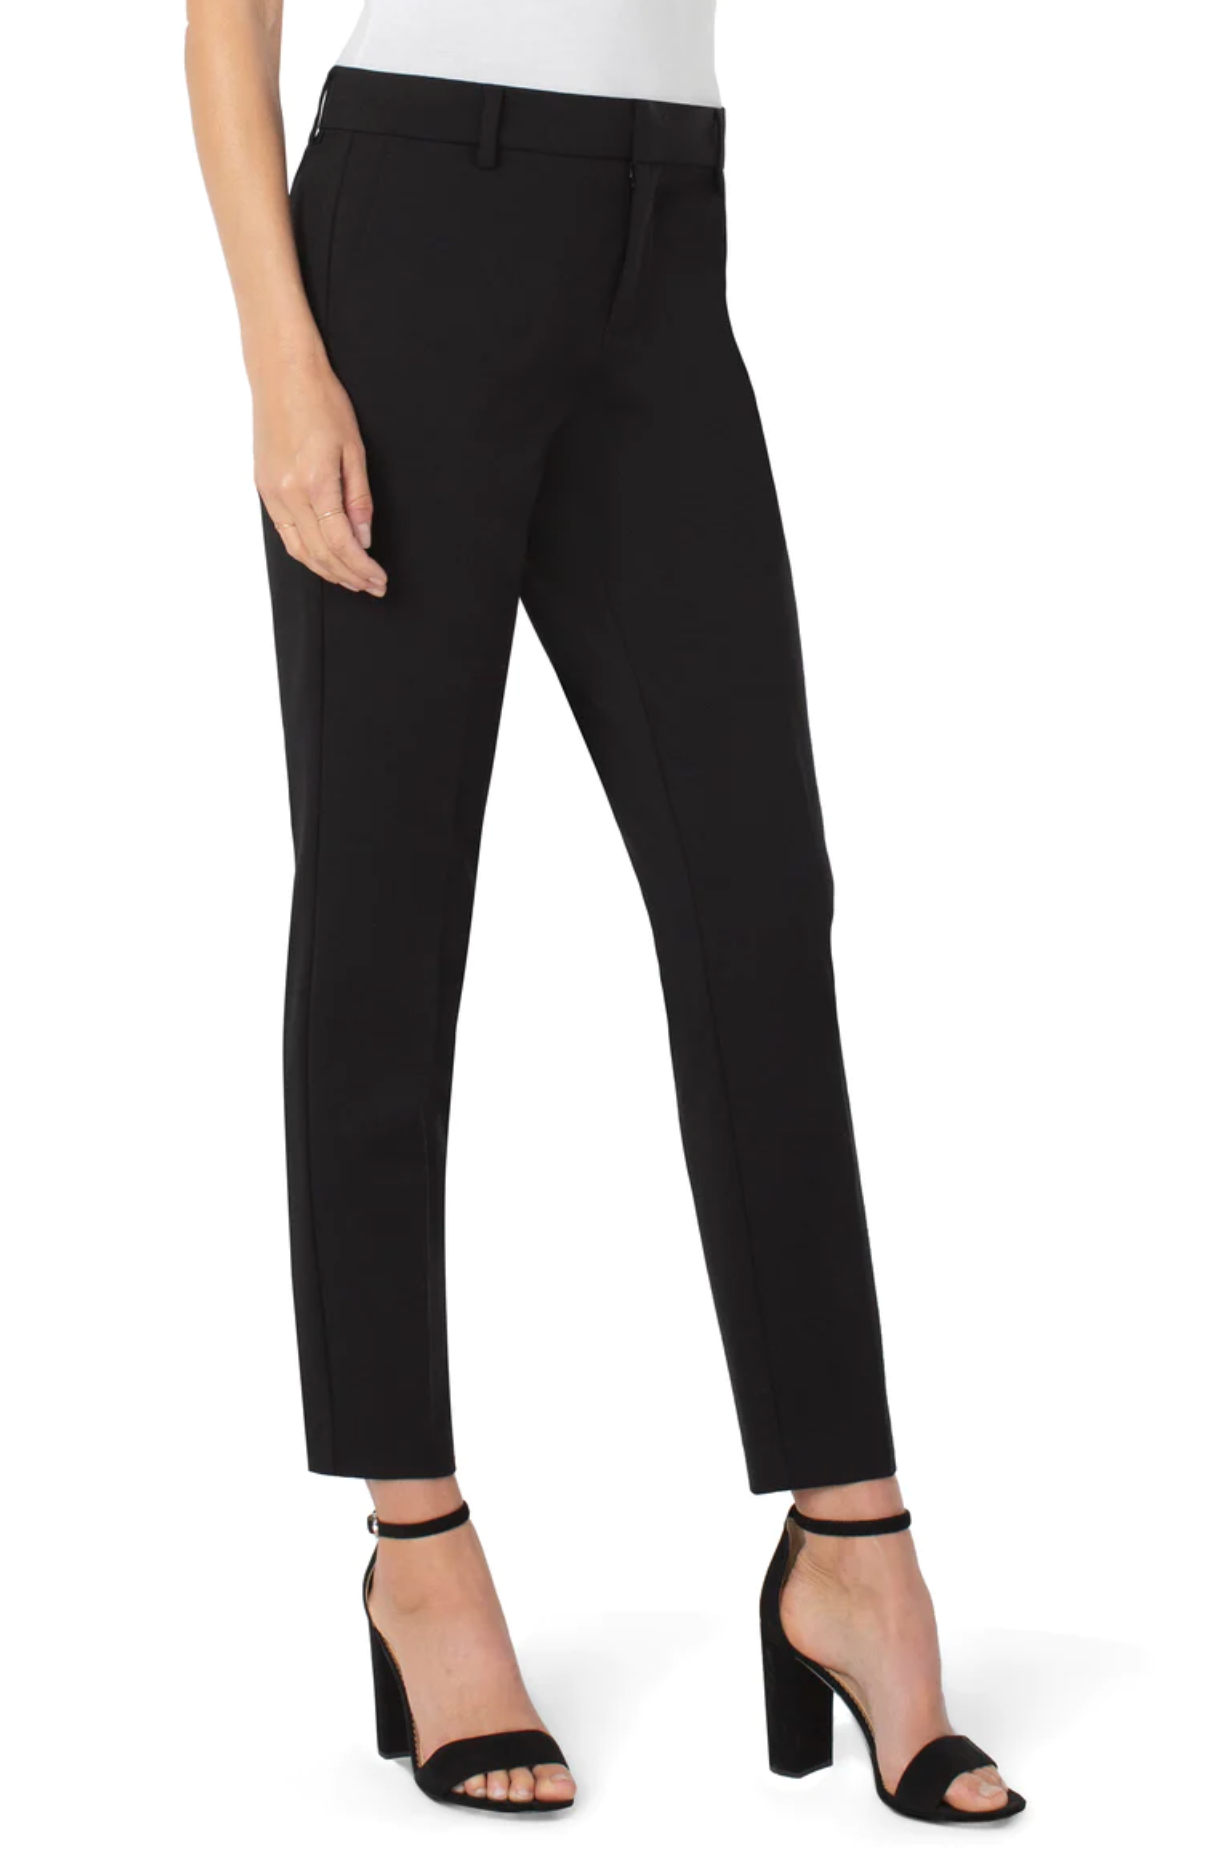 KELSEY KNIT TROUSER By Liverpool